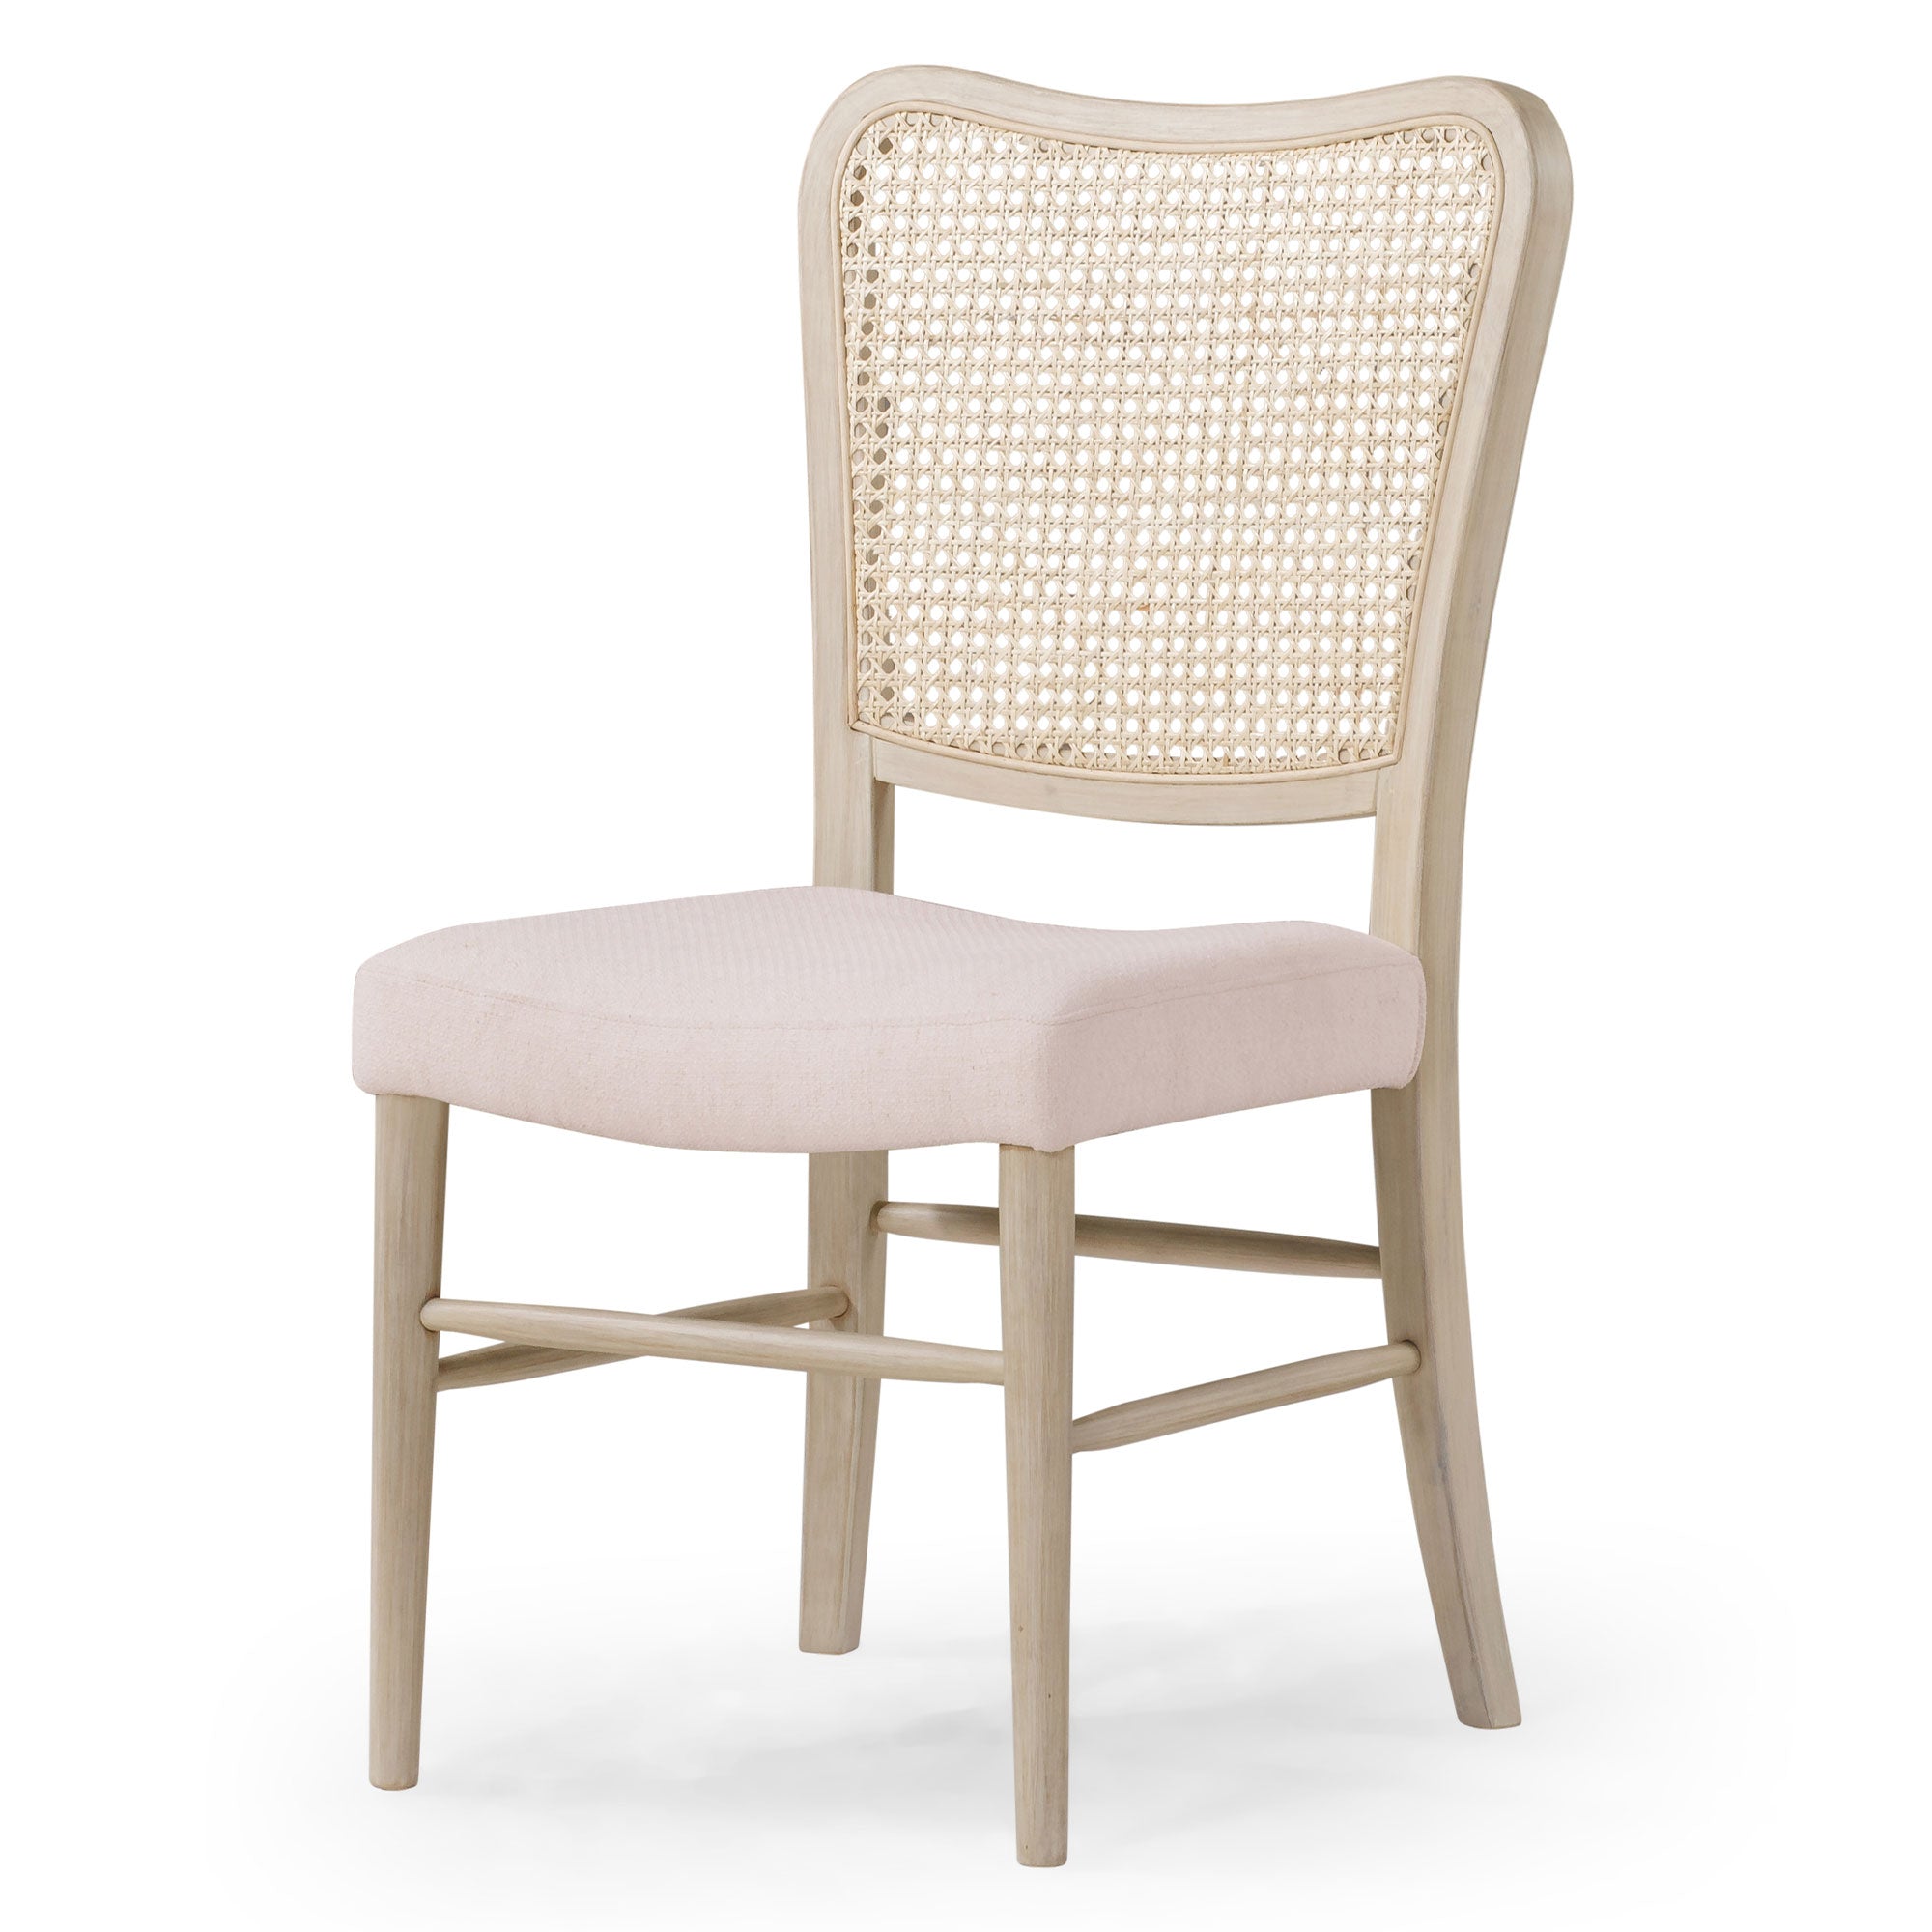 Vera Classical Wooden Dining Chair in Antiqued White Finish with Cream Weave Fabric Upholstery, Set of 2 in Dining Furniture by Maven Lane